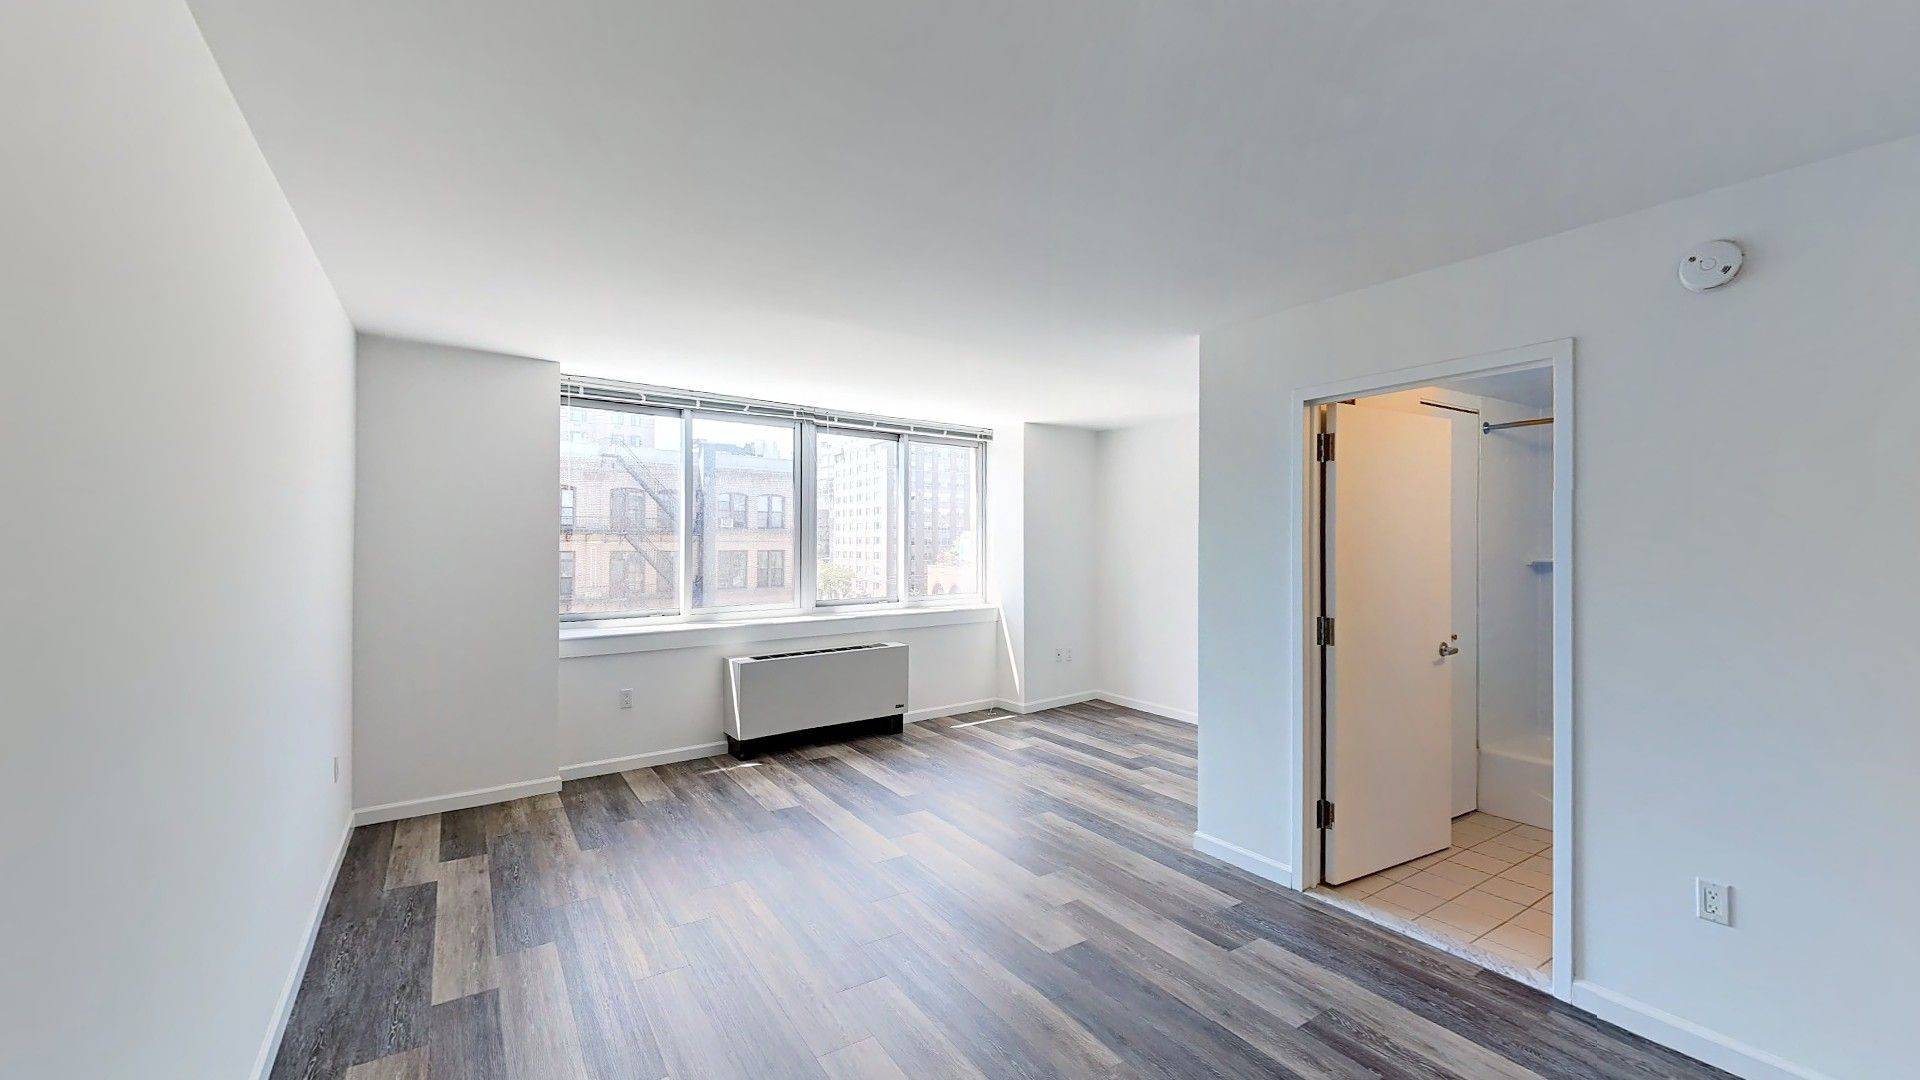 Well designed and newly renovated one bedroom with large private terrace, kitchen with stainless steel appliances, stone countertops and eating bar, floor to ceiling windows, new wood floors throughout, and ...